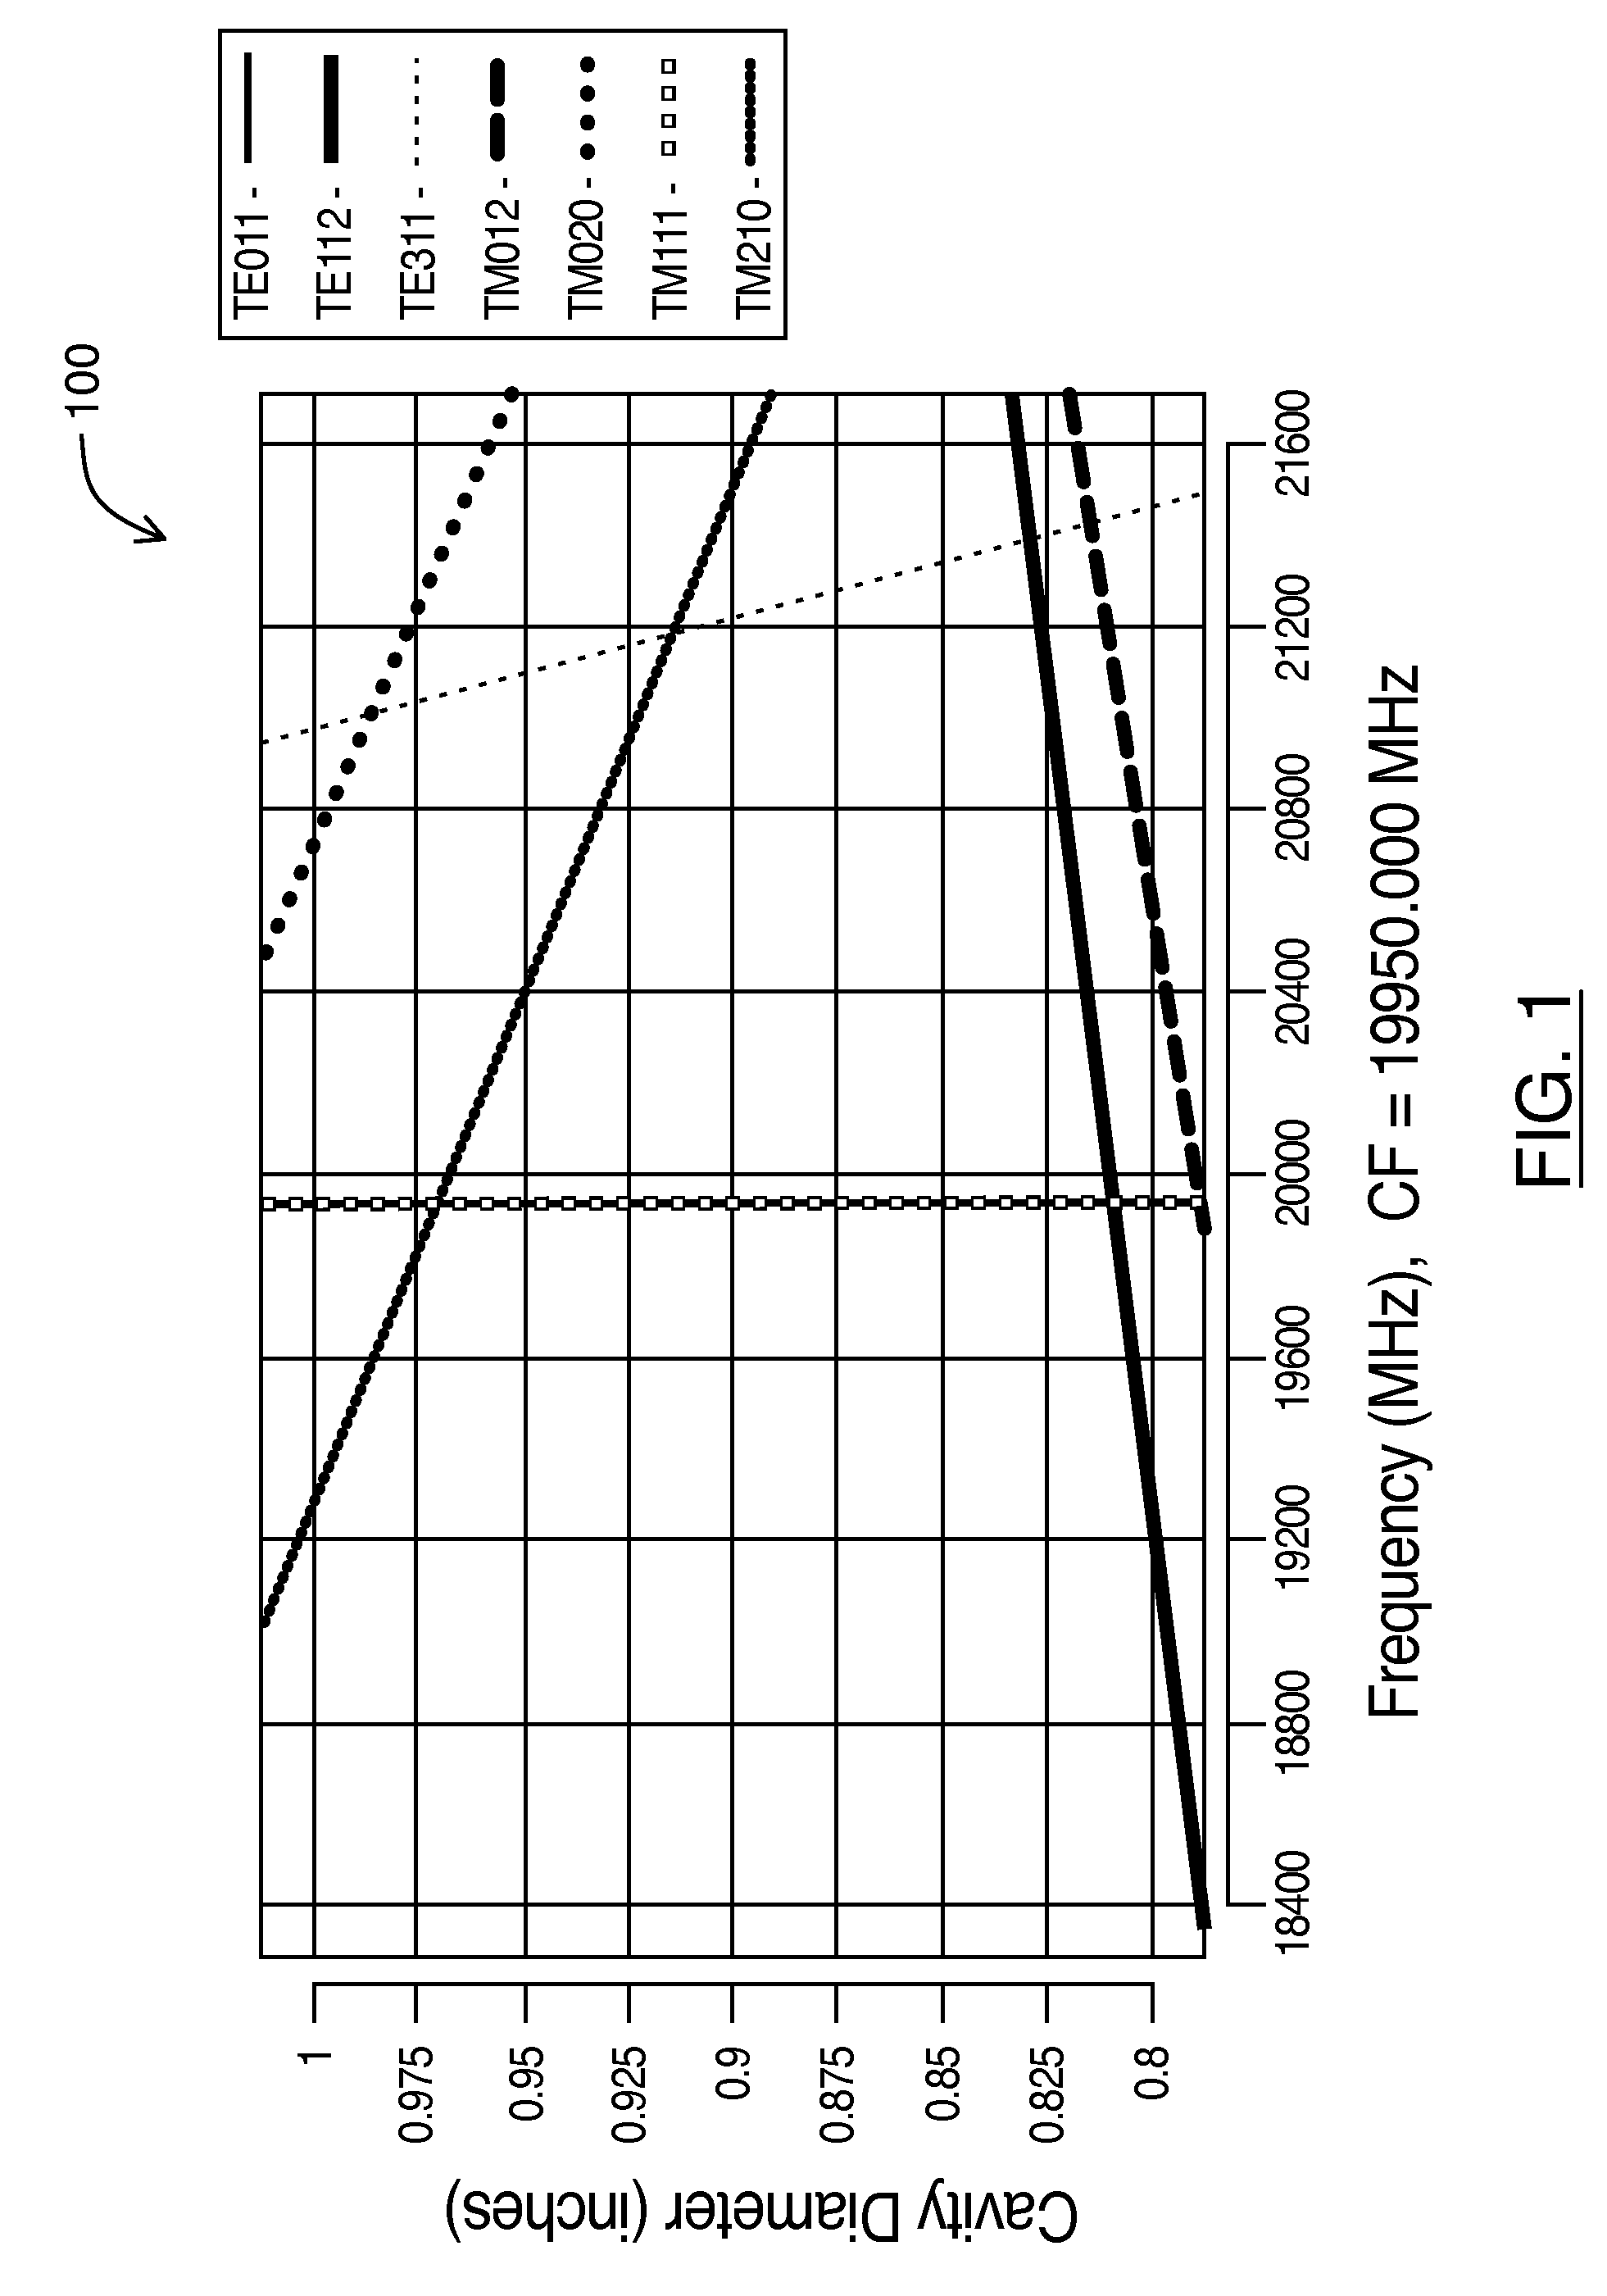 TE011 cavity filter assembly